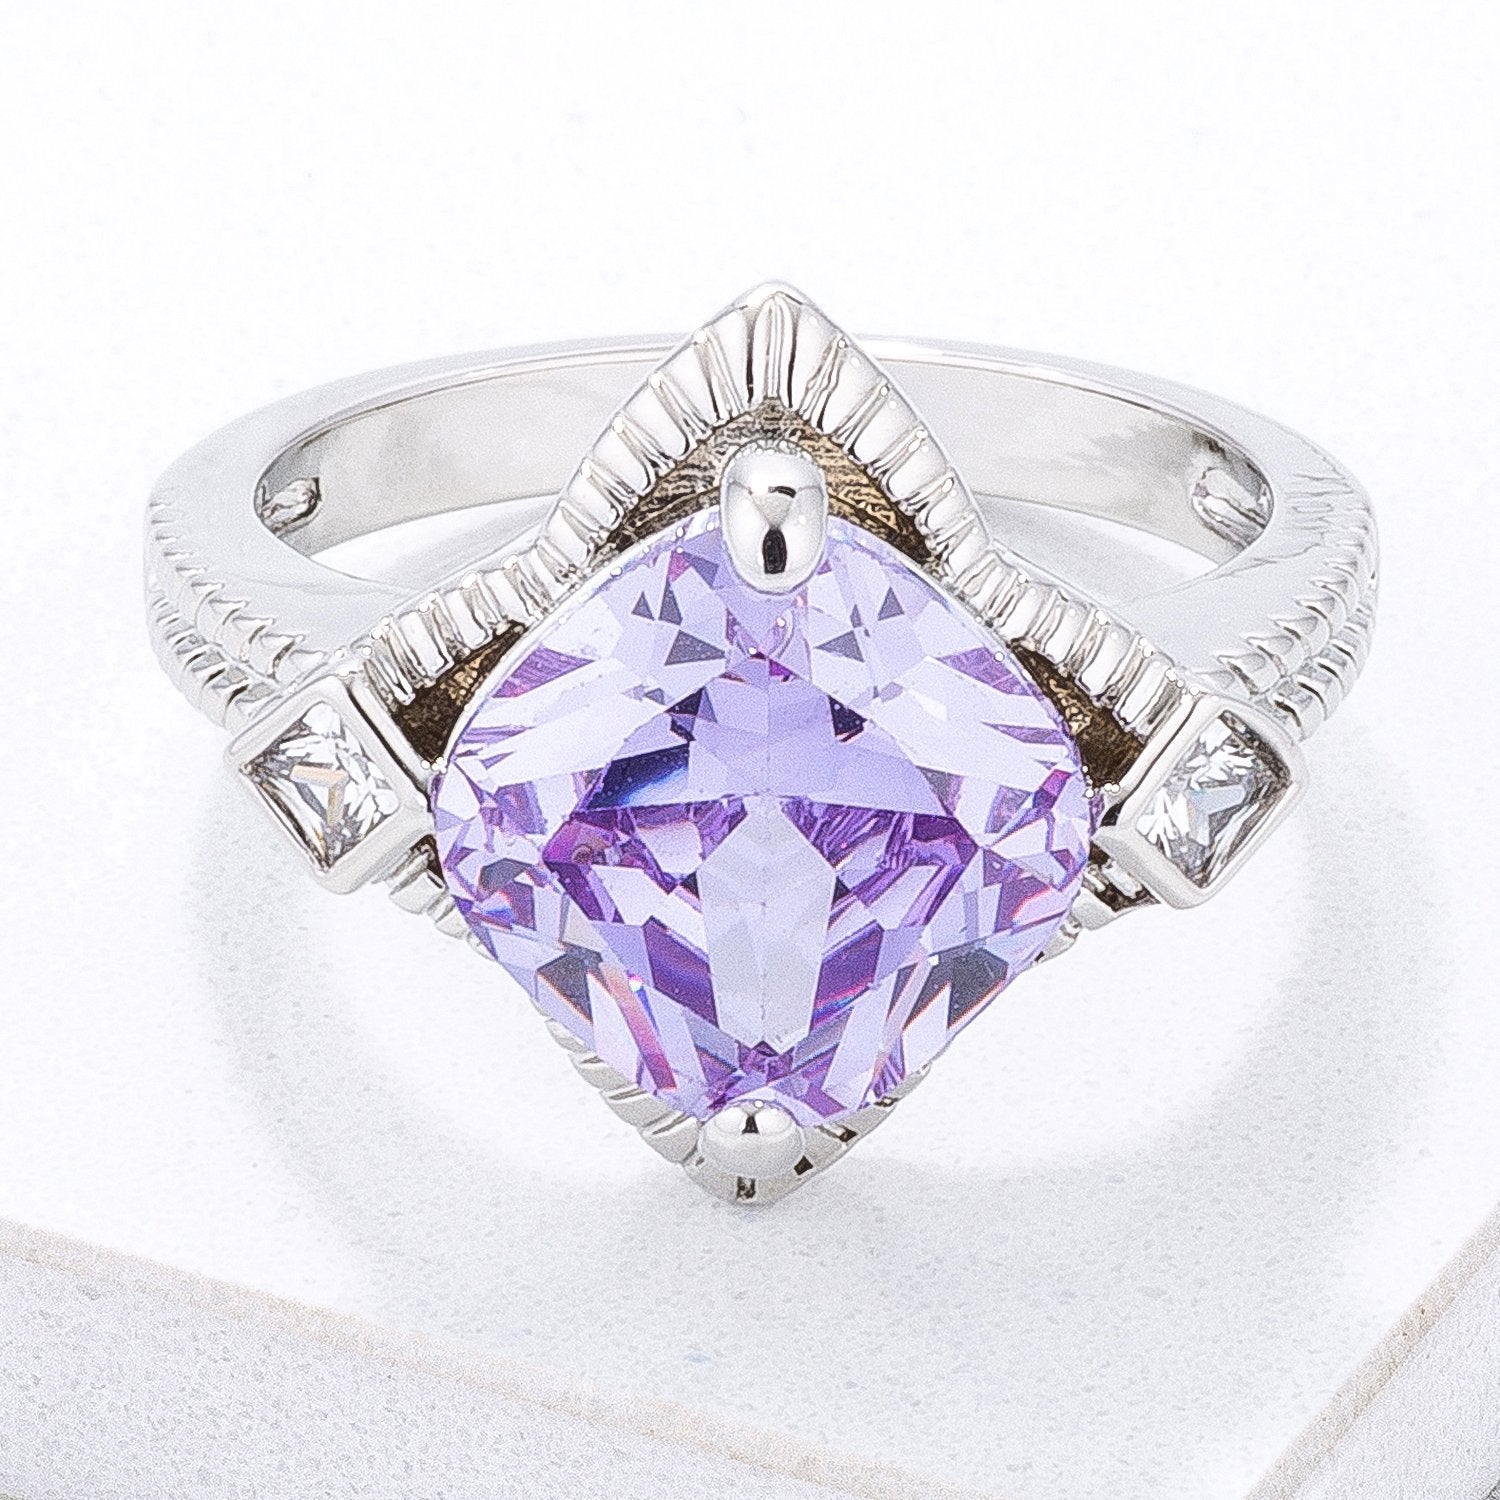 Modern Edgy Lavender CZ Cocktail Ring